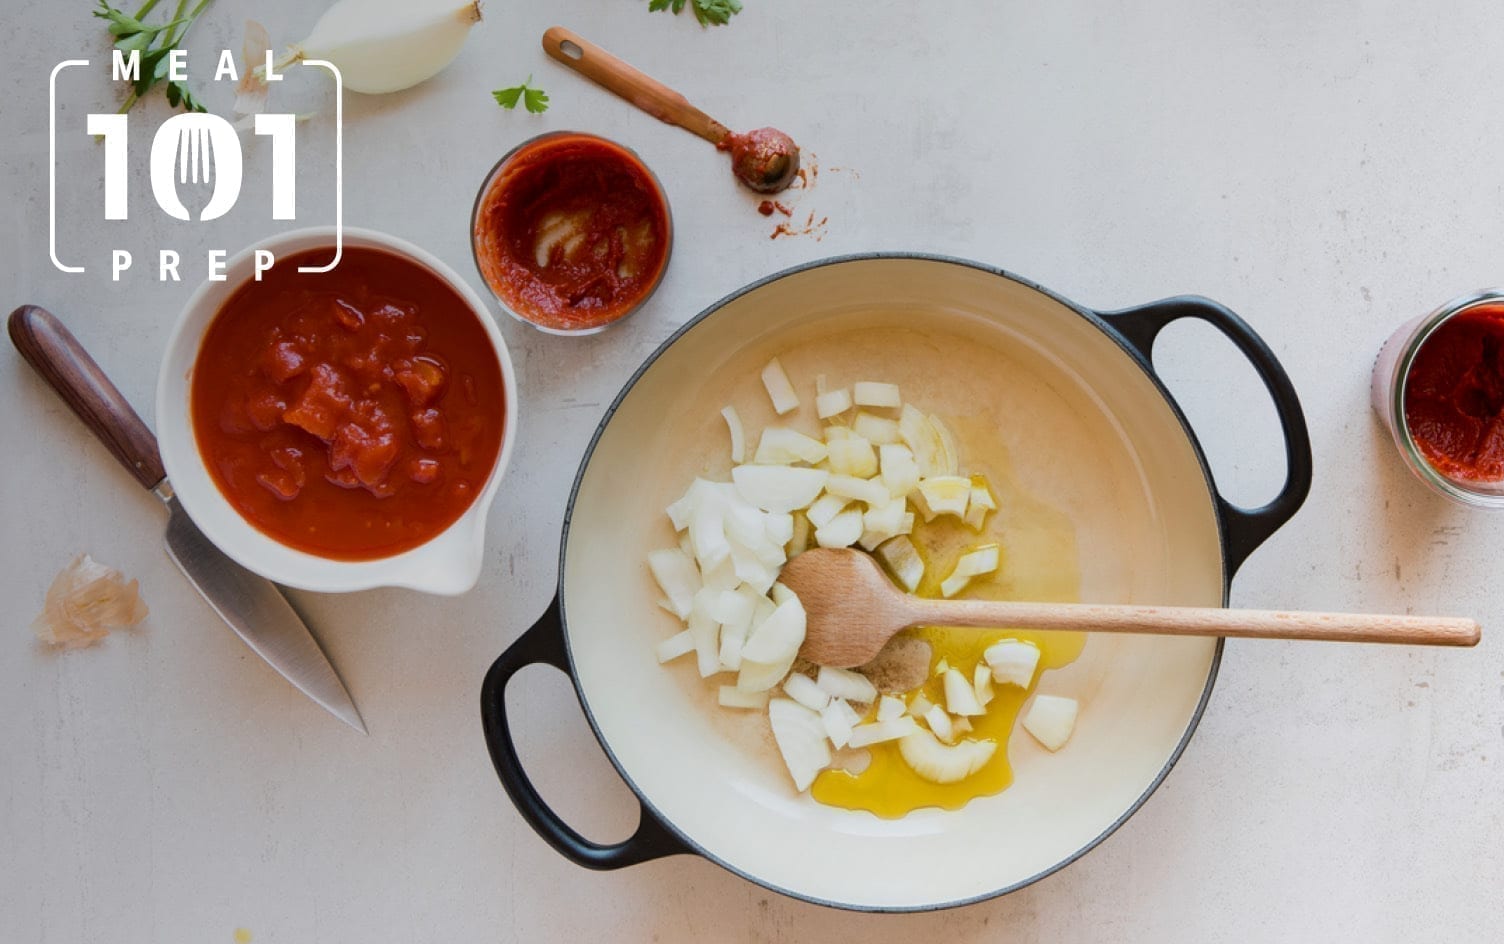 Meal Prep 101: Batch-Cooking Healthy Sauces